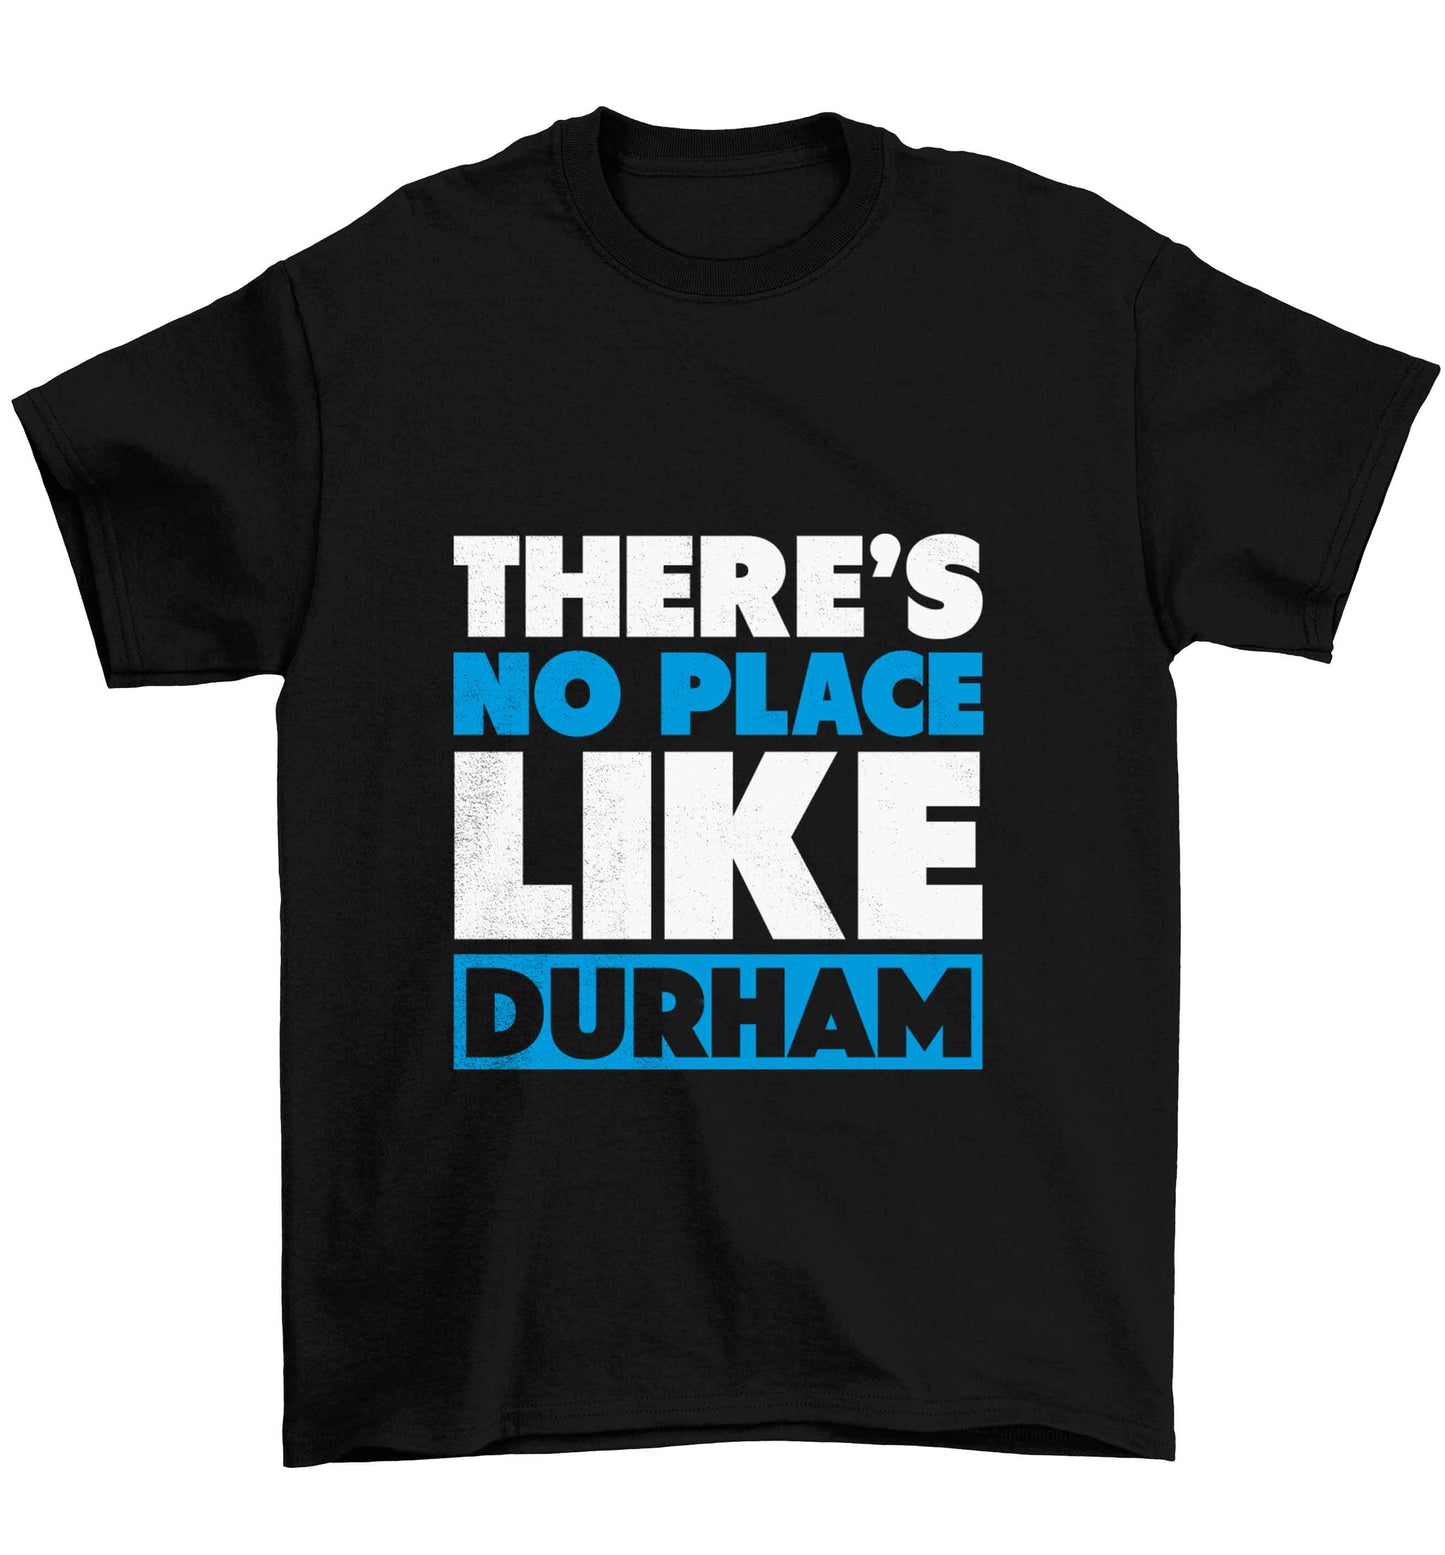 There's no place like Durham Children's black Tshirt 12-13 Years